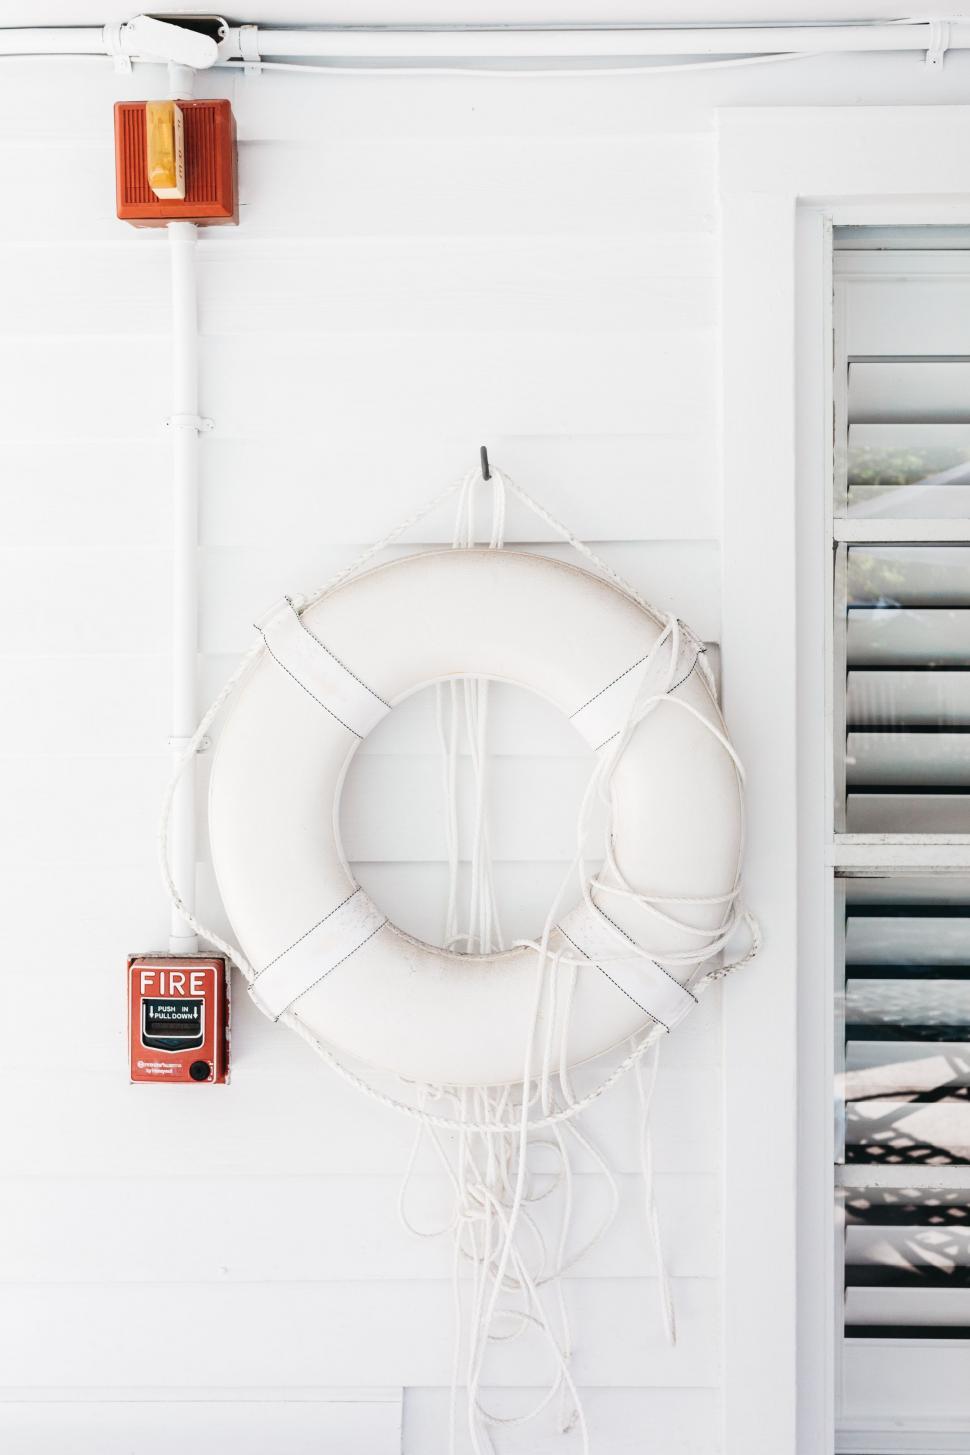 Free Image of Life Preserver Hanging on White Wall 